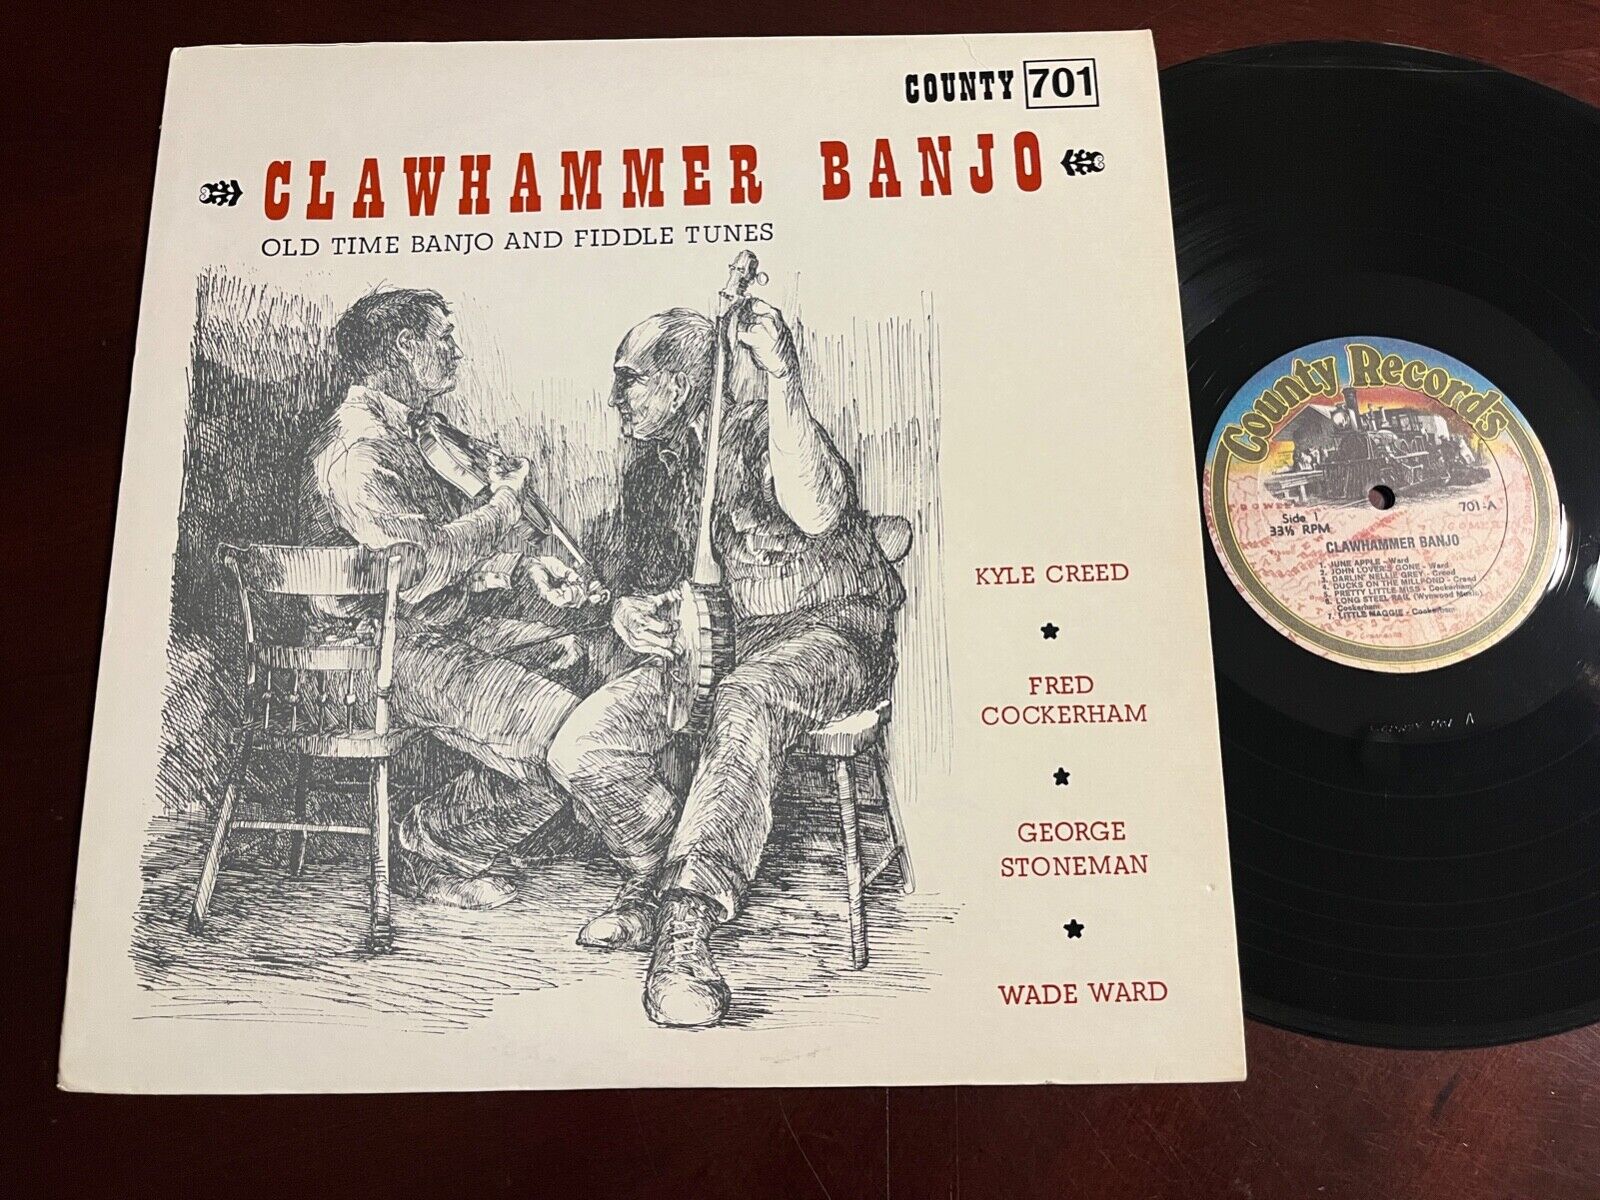 Clawhammer Banjo Old Time Banjo And Fiddle Tunes 1965 COUNTY RECORDS FOLK LP.